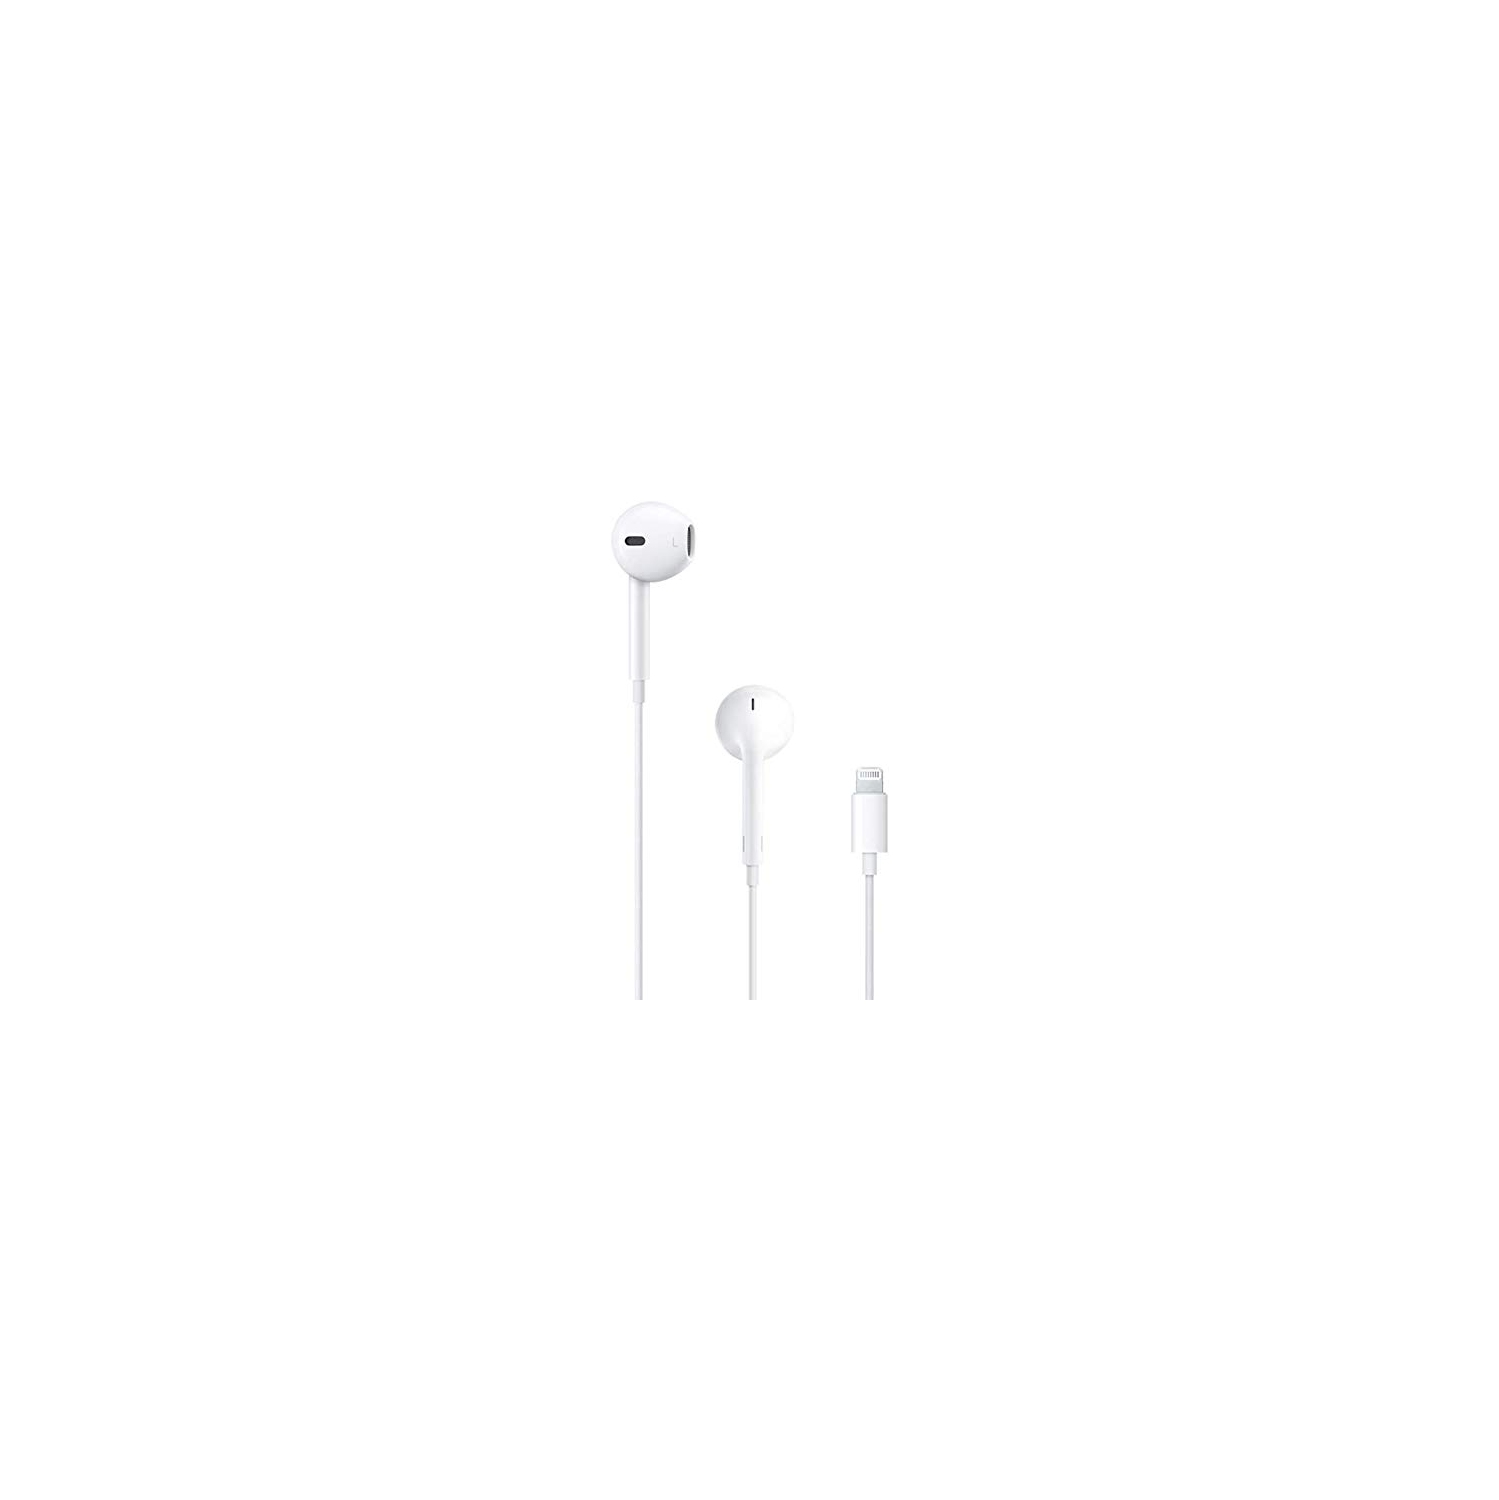 LIPTO - Lightning iPhone Headphones Earphones Earbuds with Volume Buttons & Microphone for iPhone 7 8 Plus X 11 Pro Max